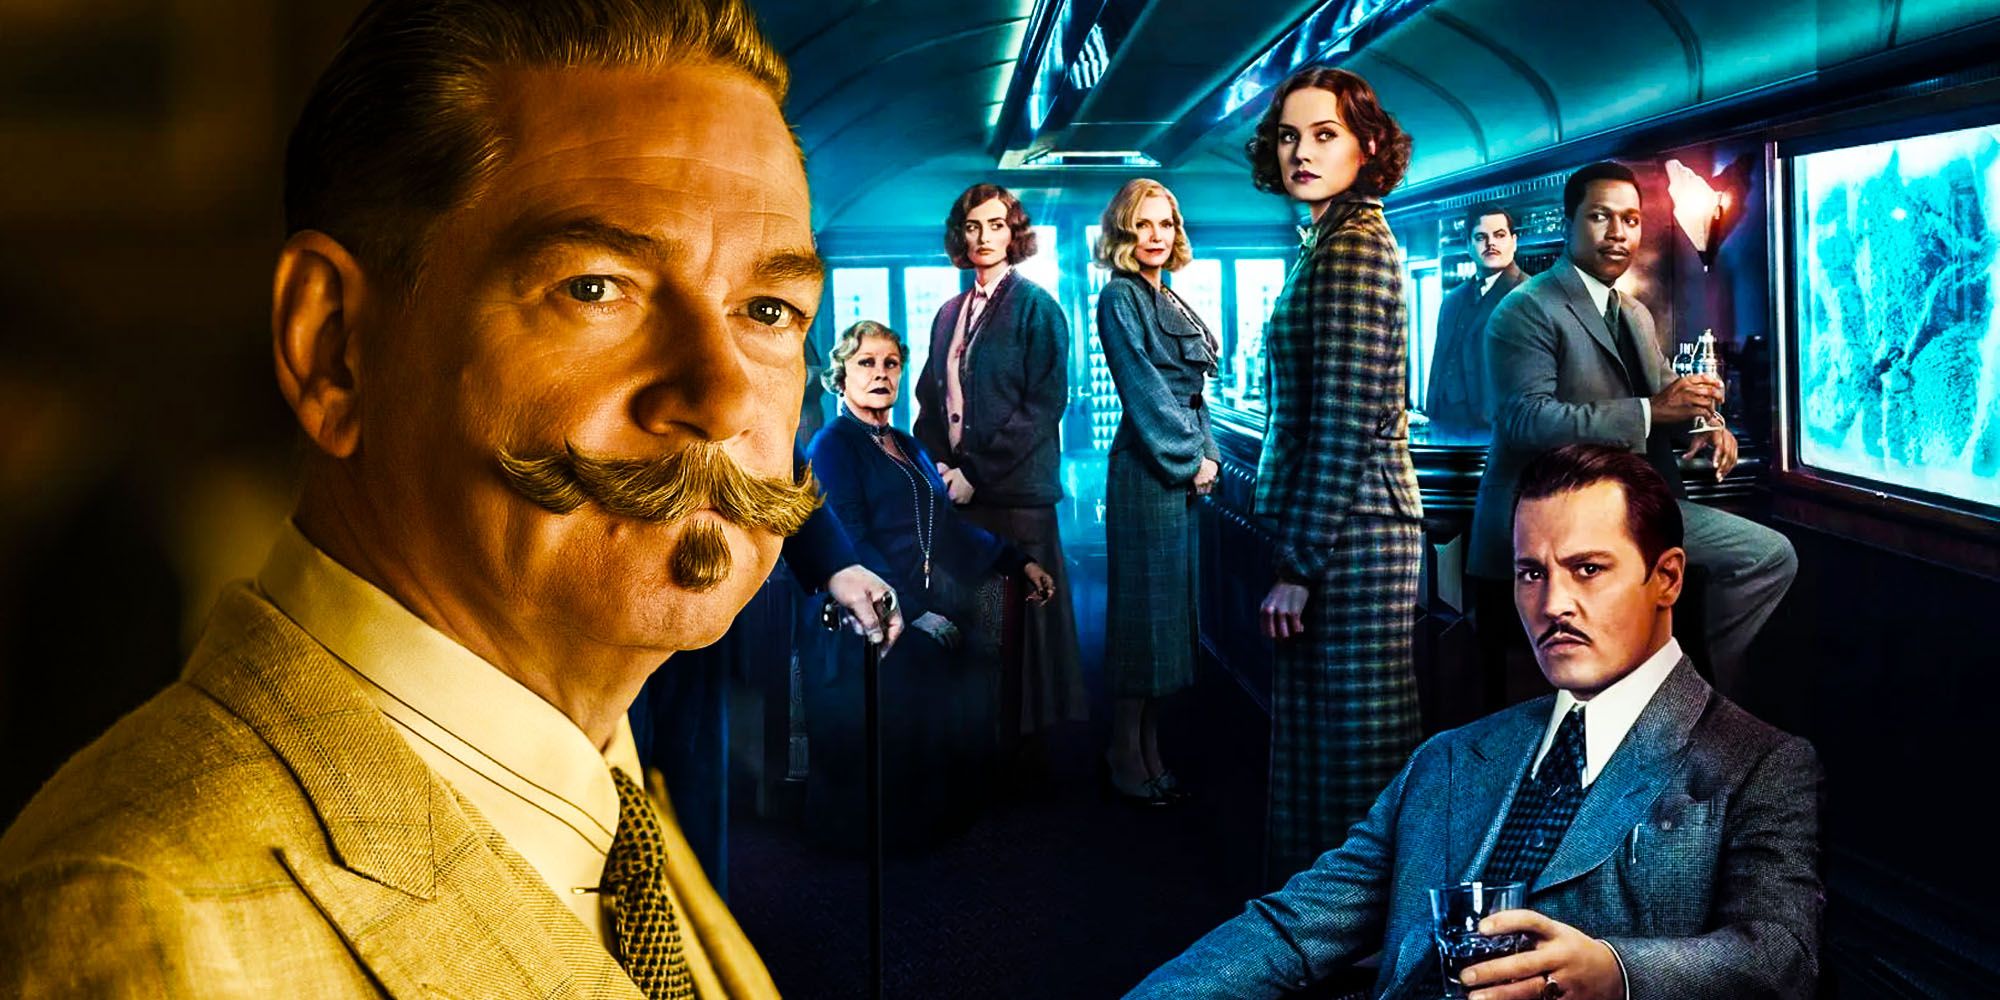 Death on the nile retcons murder on the orient express ending